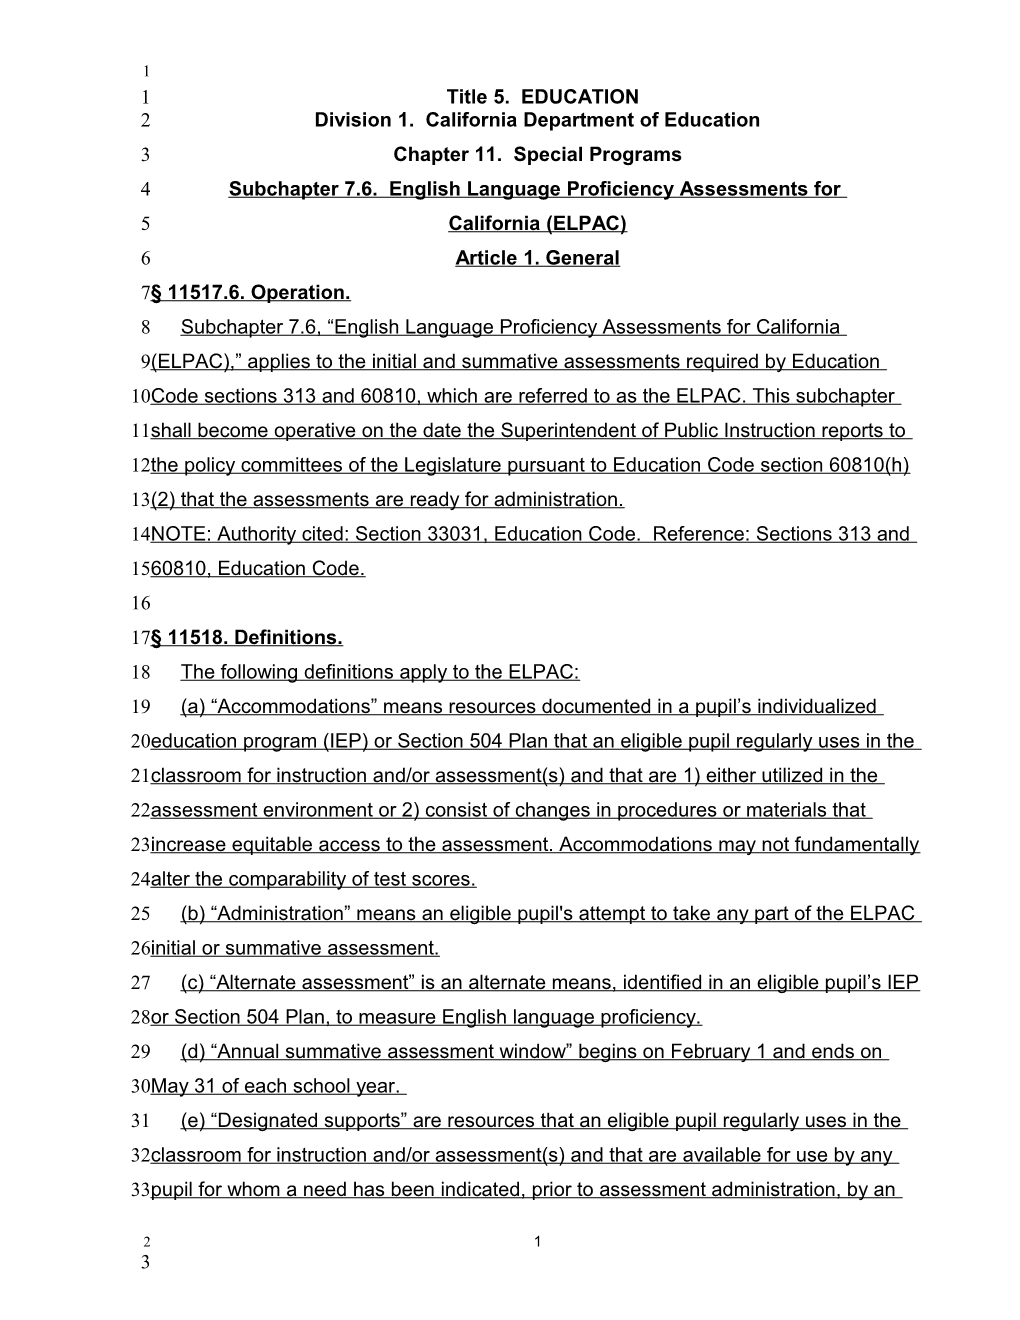 ELPAC 2Nd 15-Day Regulations - Laws & Regulations (CA Dept of Education)